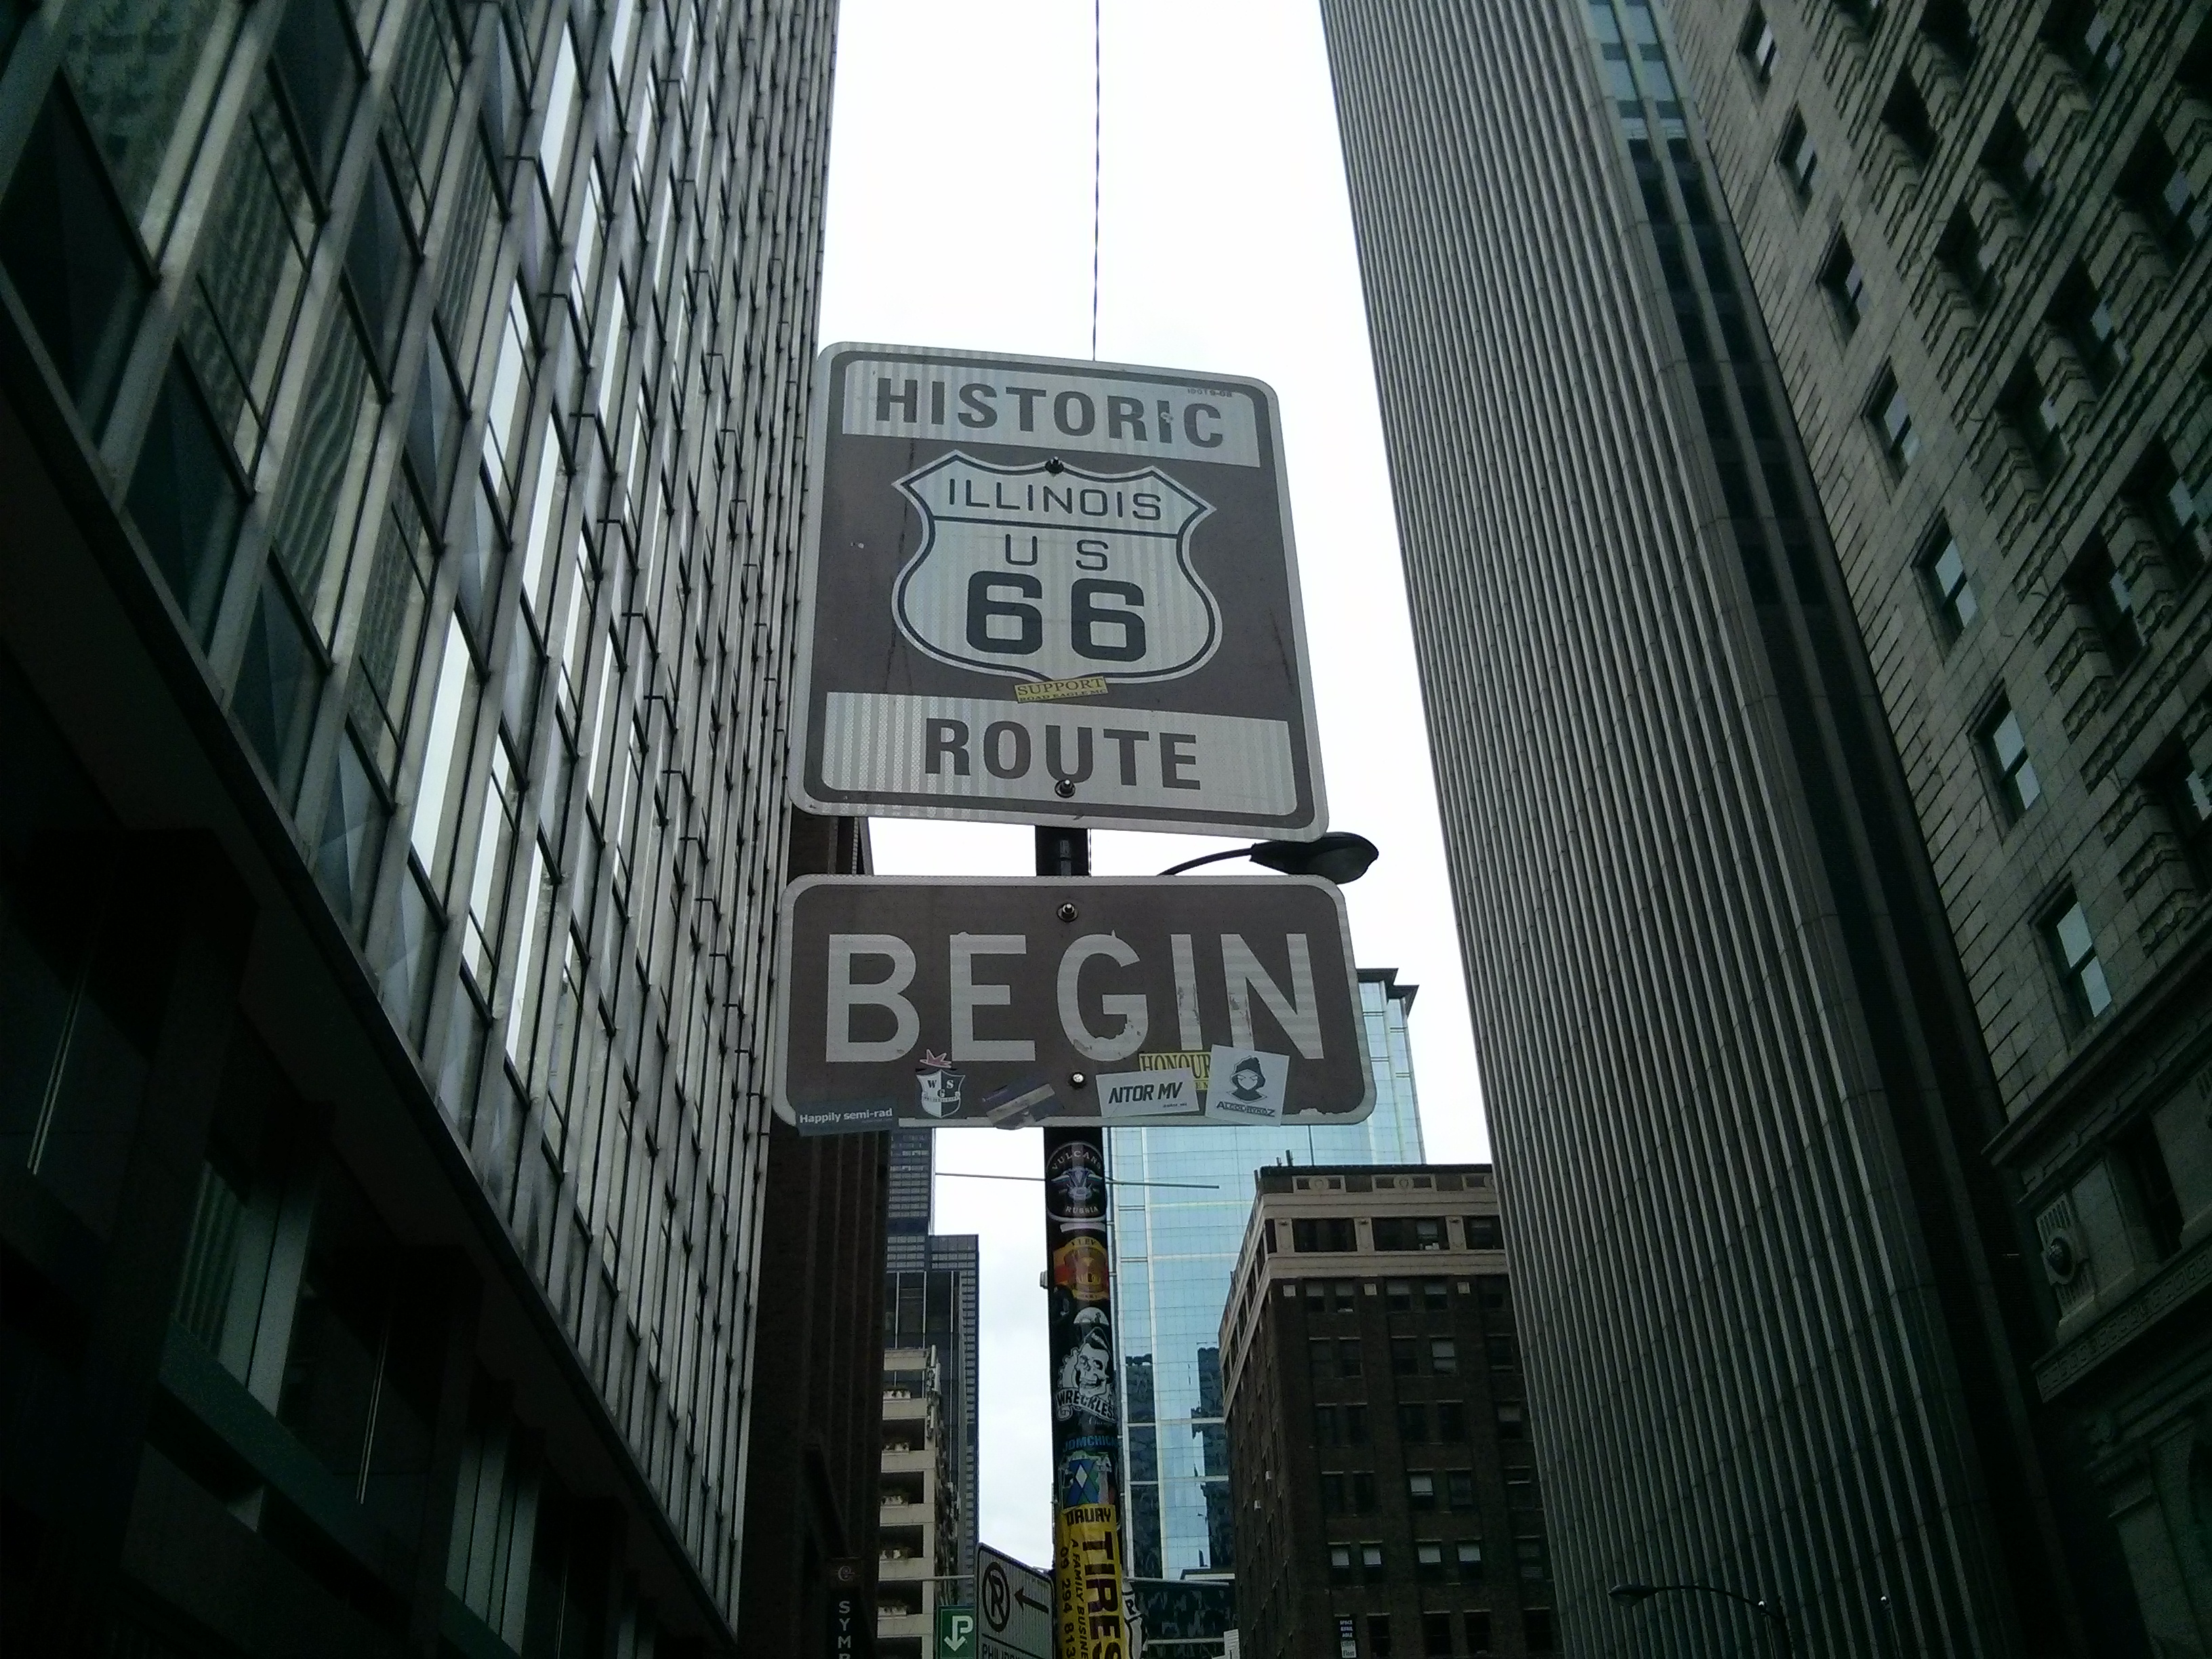 Street sign marking the beginning of historical Route 66.